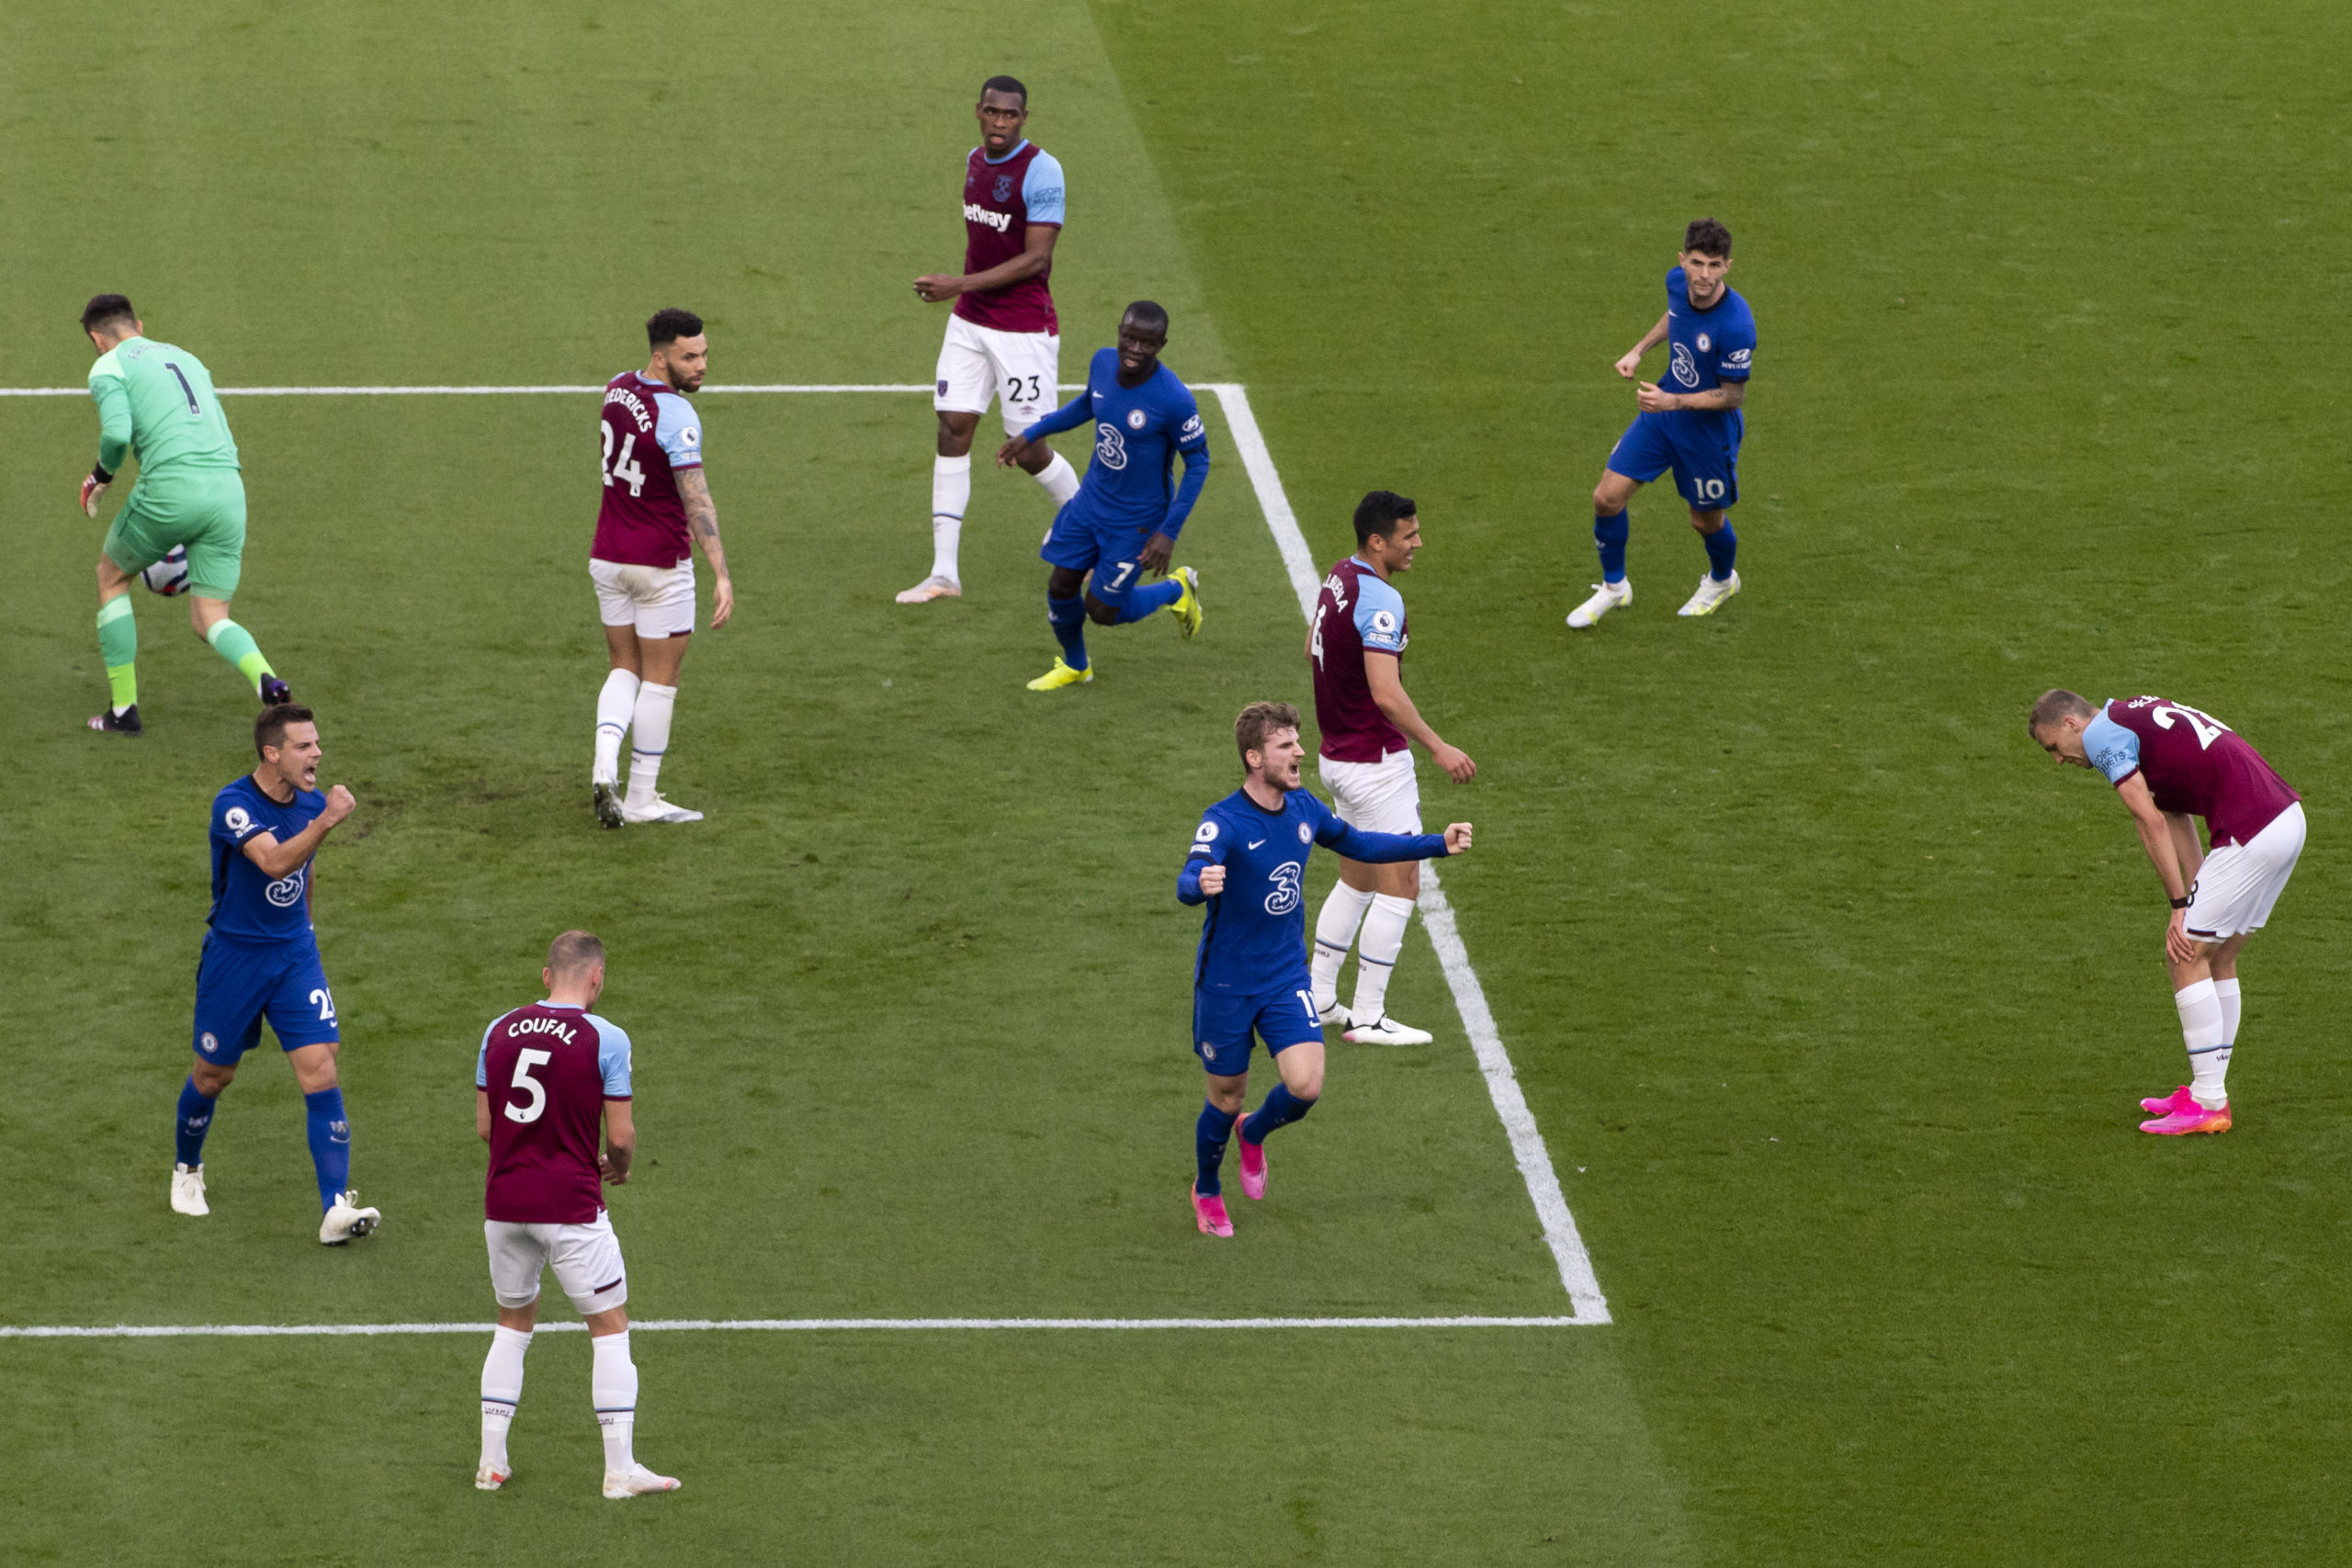 west ham united vs chelsea preview